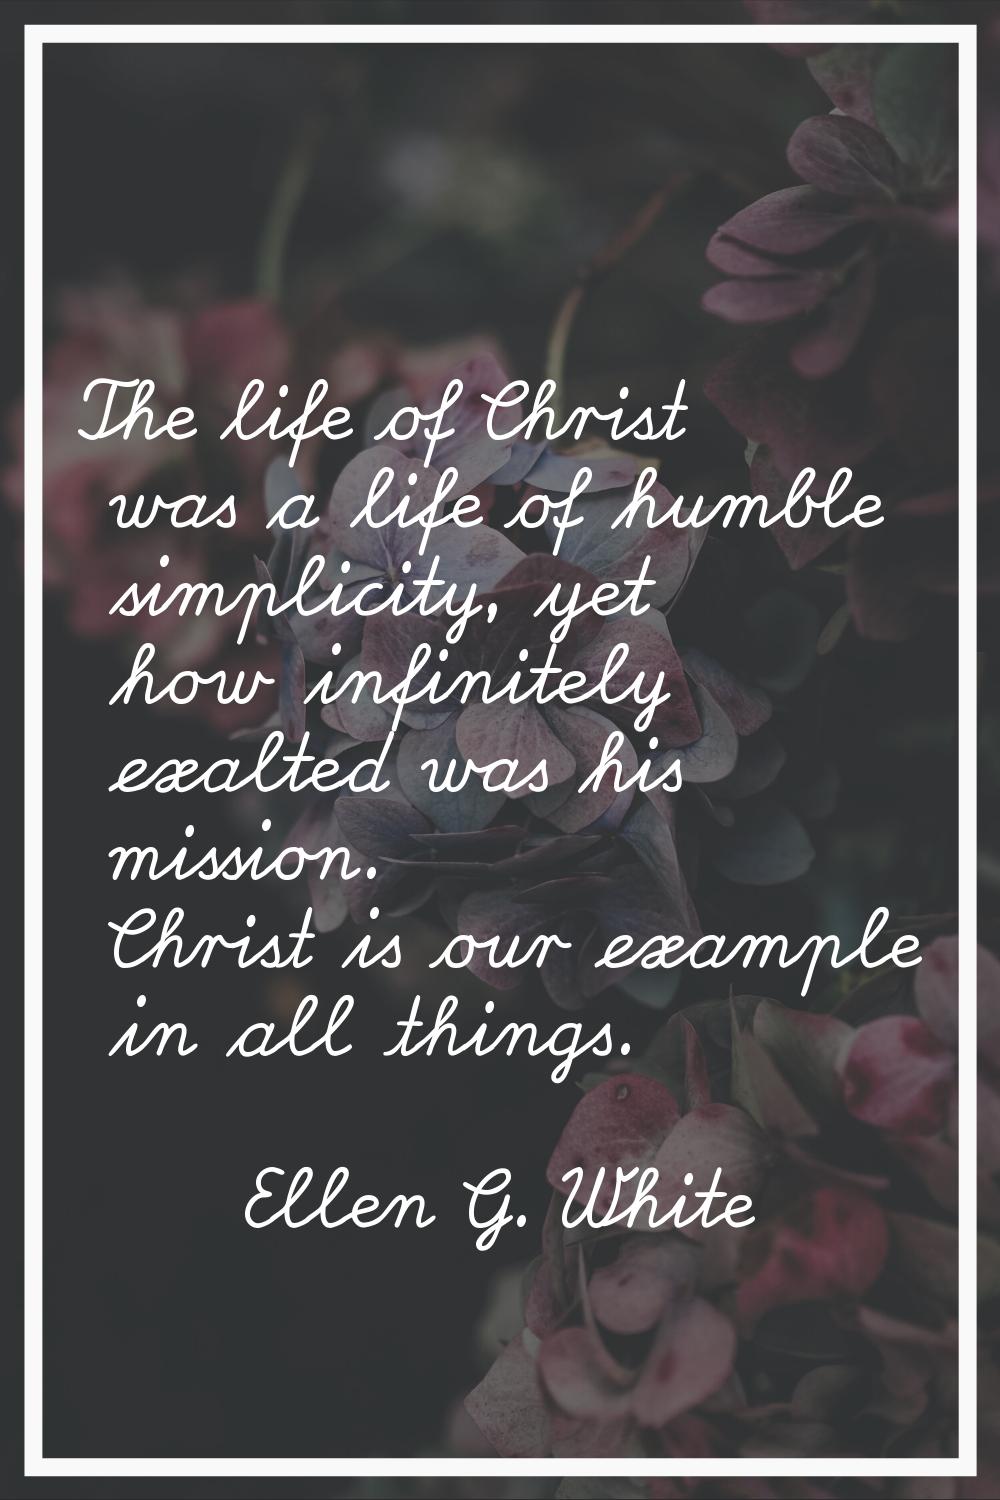 The life of Christ was a life of humble simplicity, yet how infinitely exalted was his mission. Chr